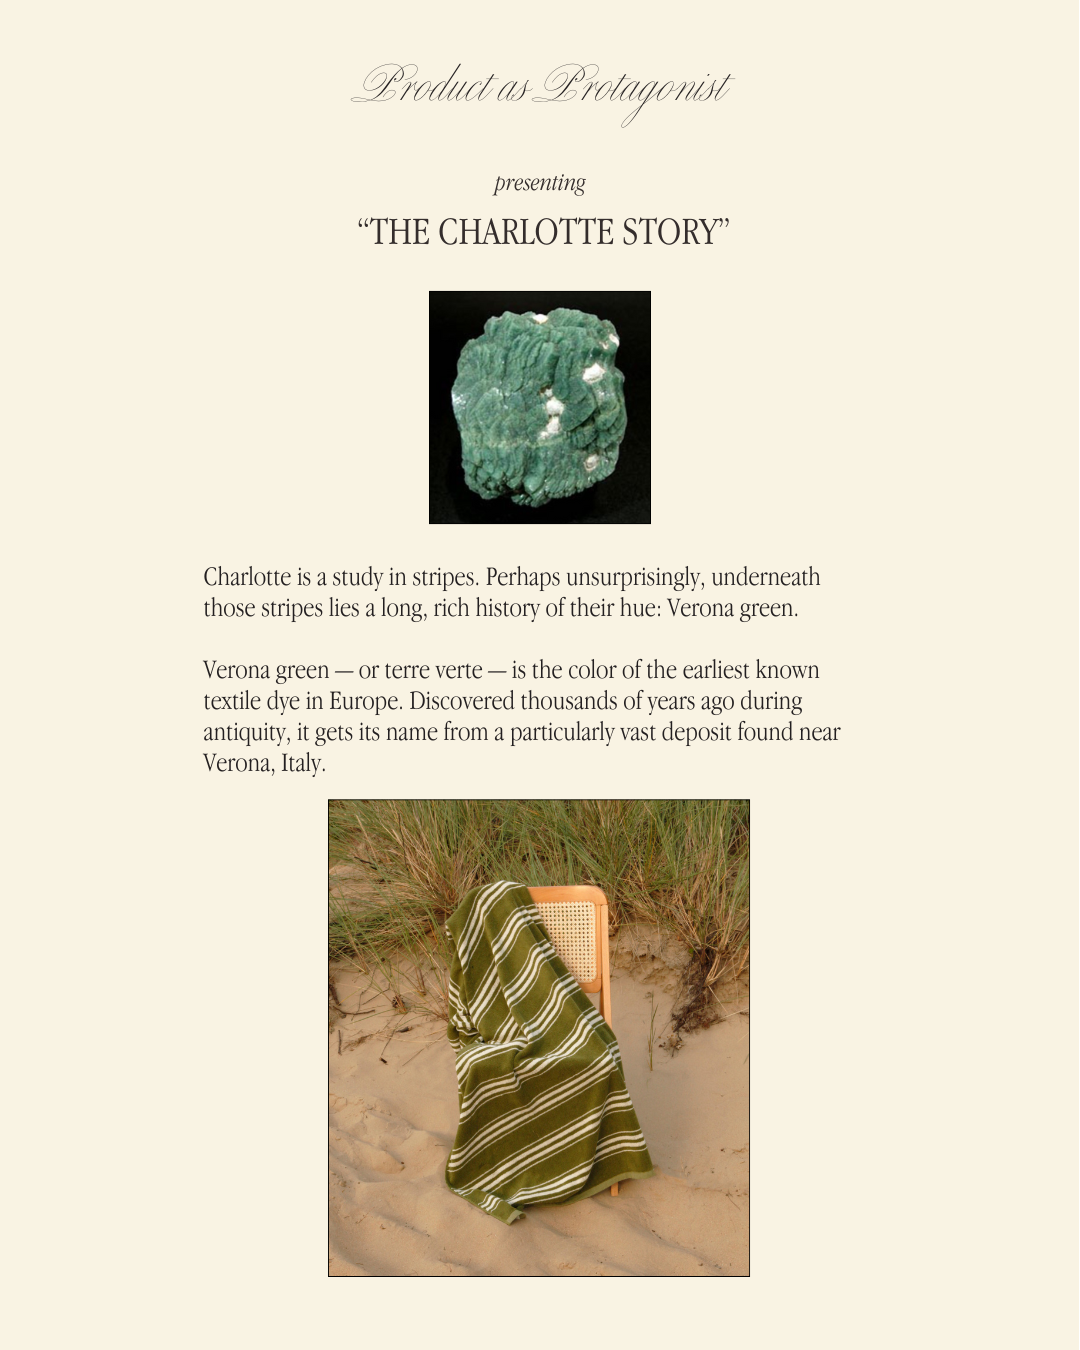 PRODUCT AS PROTAGONIST: The Charlotte Story